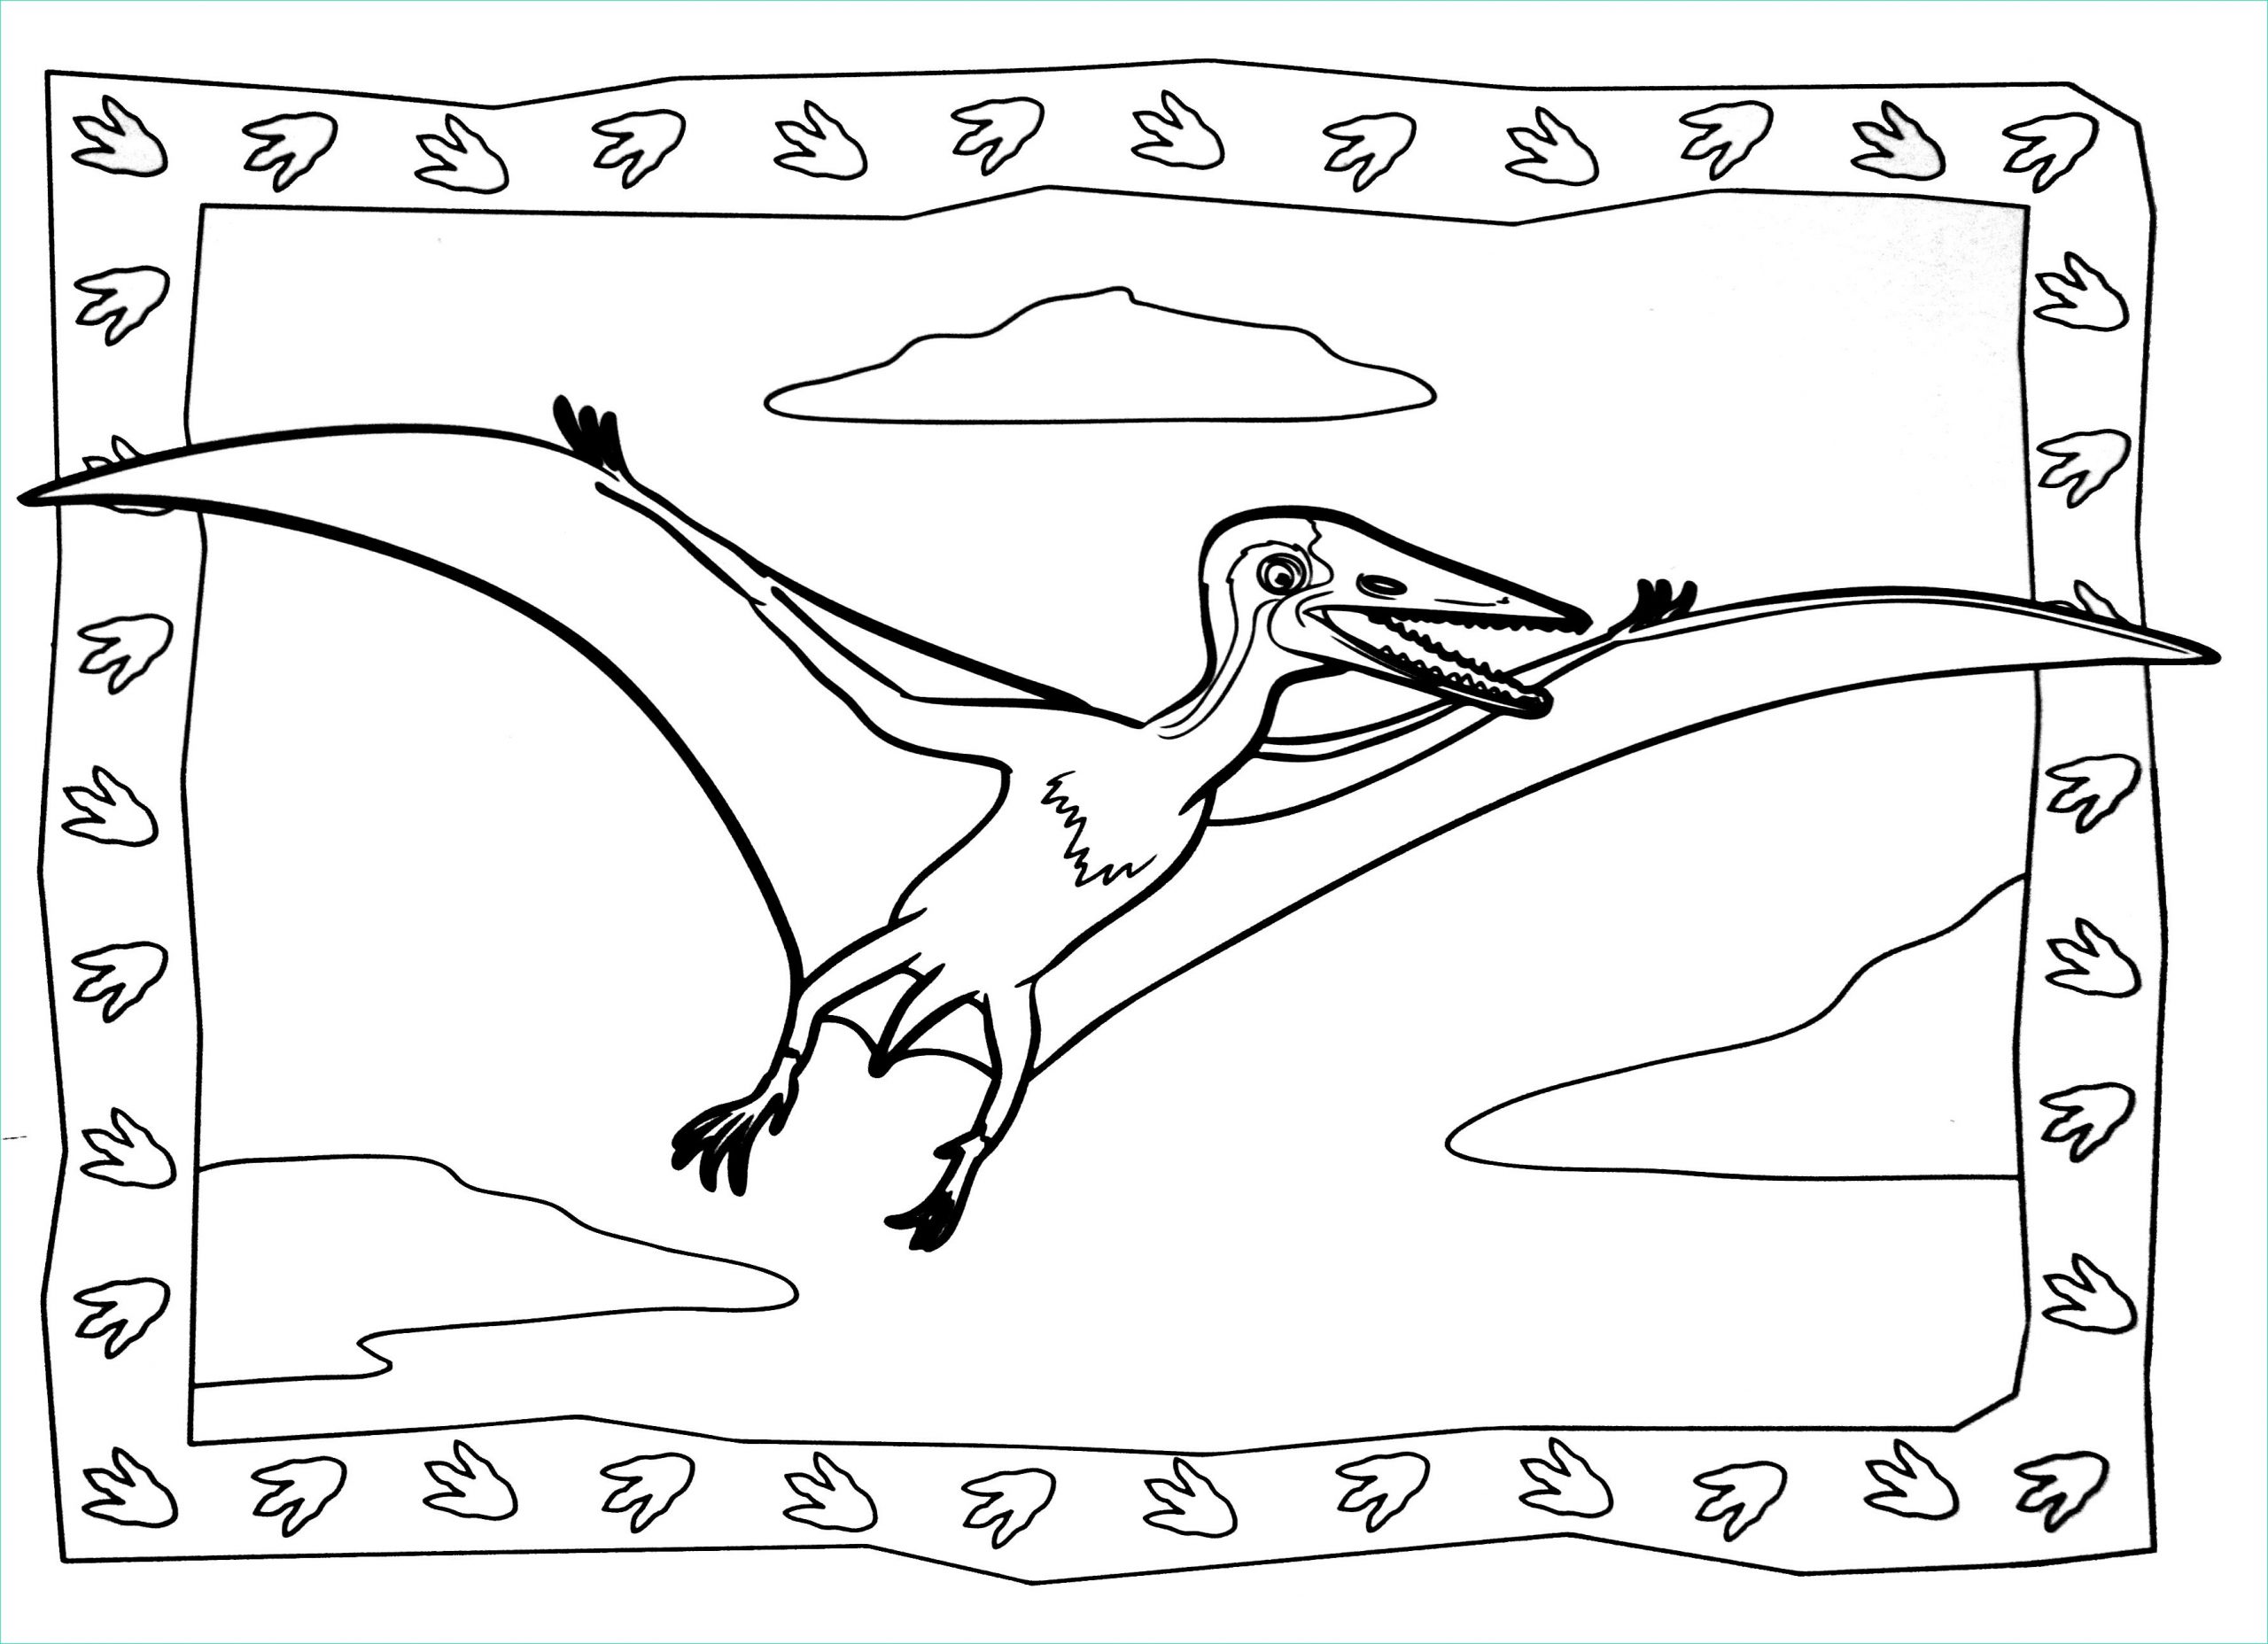 image=dinosaurs Coloring for kids dinosaurs 1